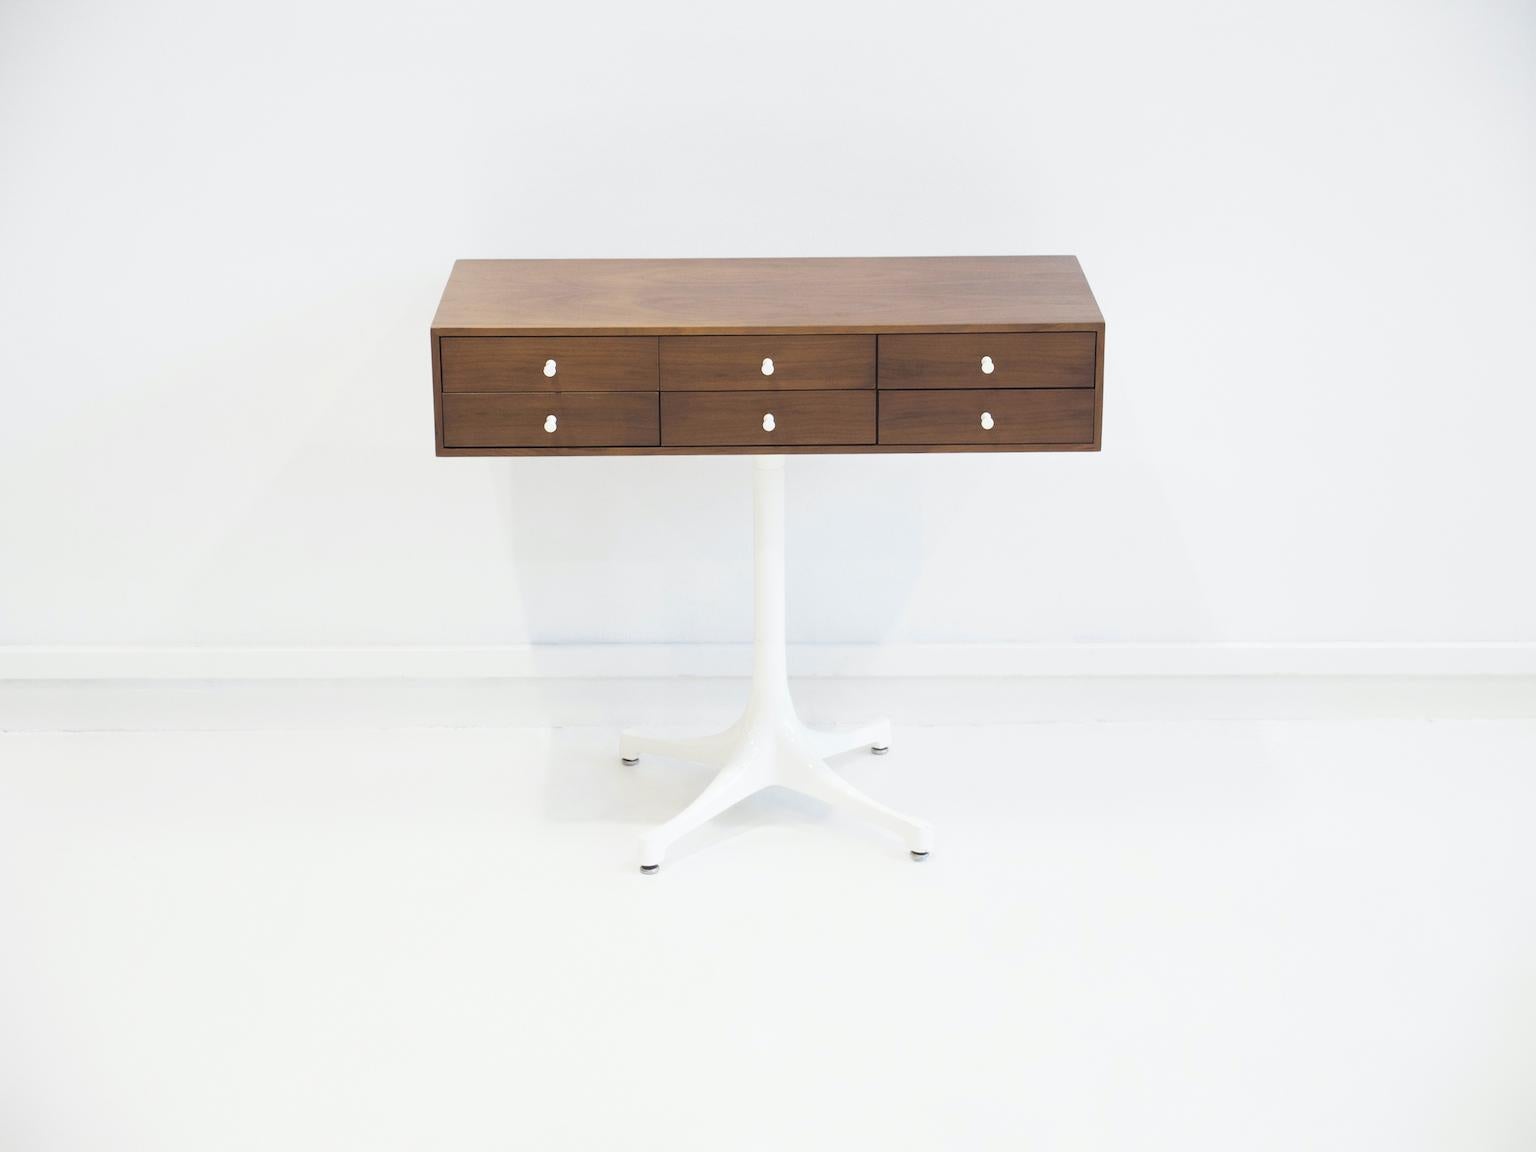 Small chest of drawers or console table in walnut, design attributed to George Nelson. Base made of white lacquered metal with a star base, box-shaped body with surfaces made of walnut. Equipped with six drawers, fittings made of white lacquered